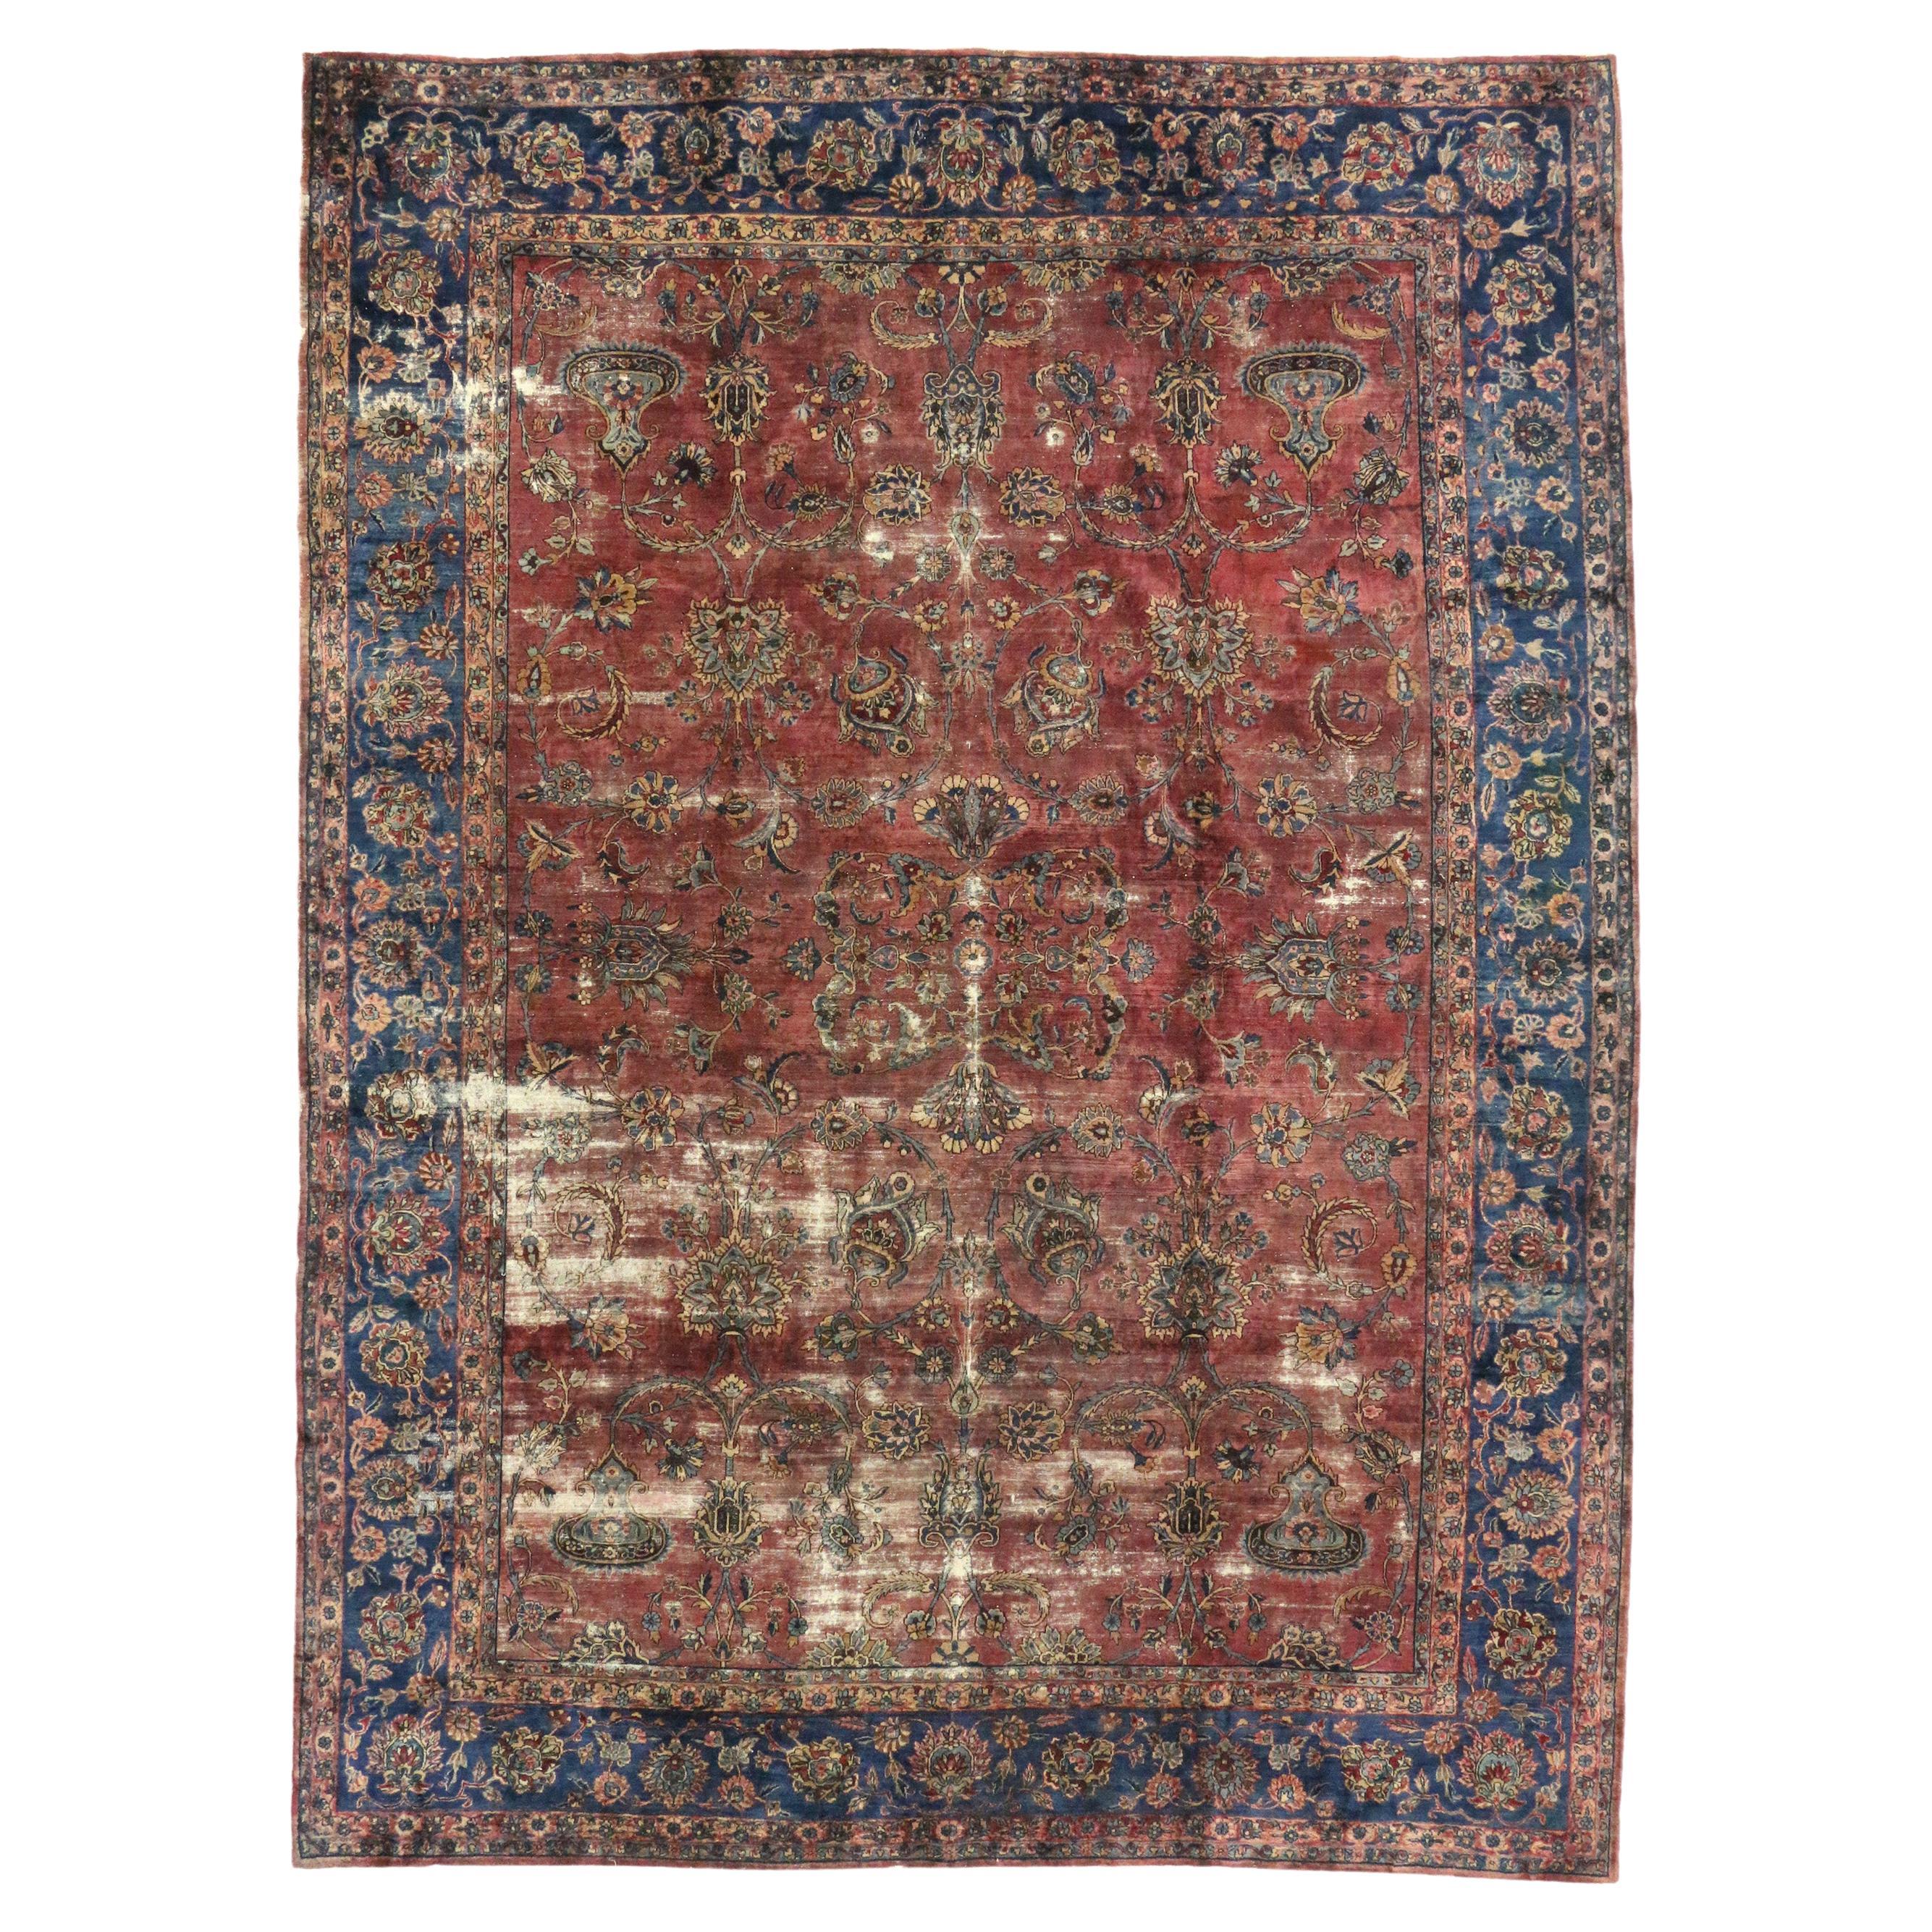 Distressed Antique Persian Kerman Rug with New England Cape Cod Style